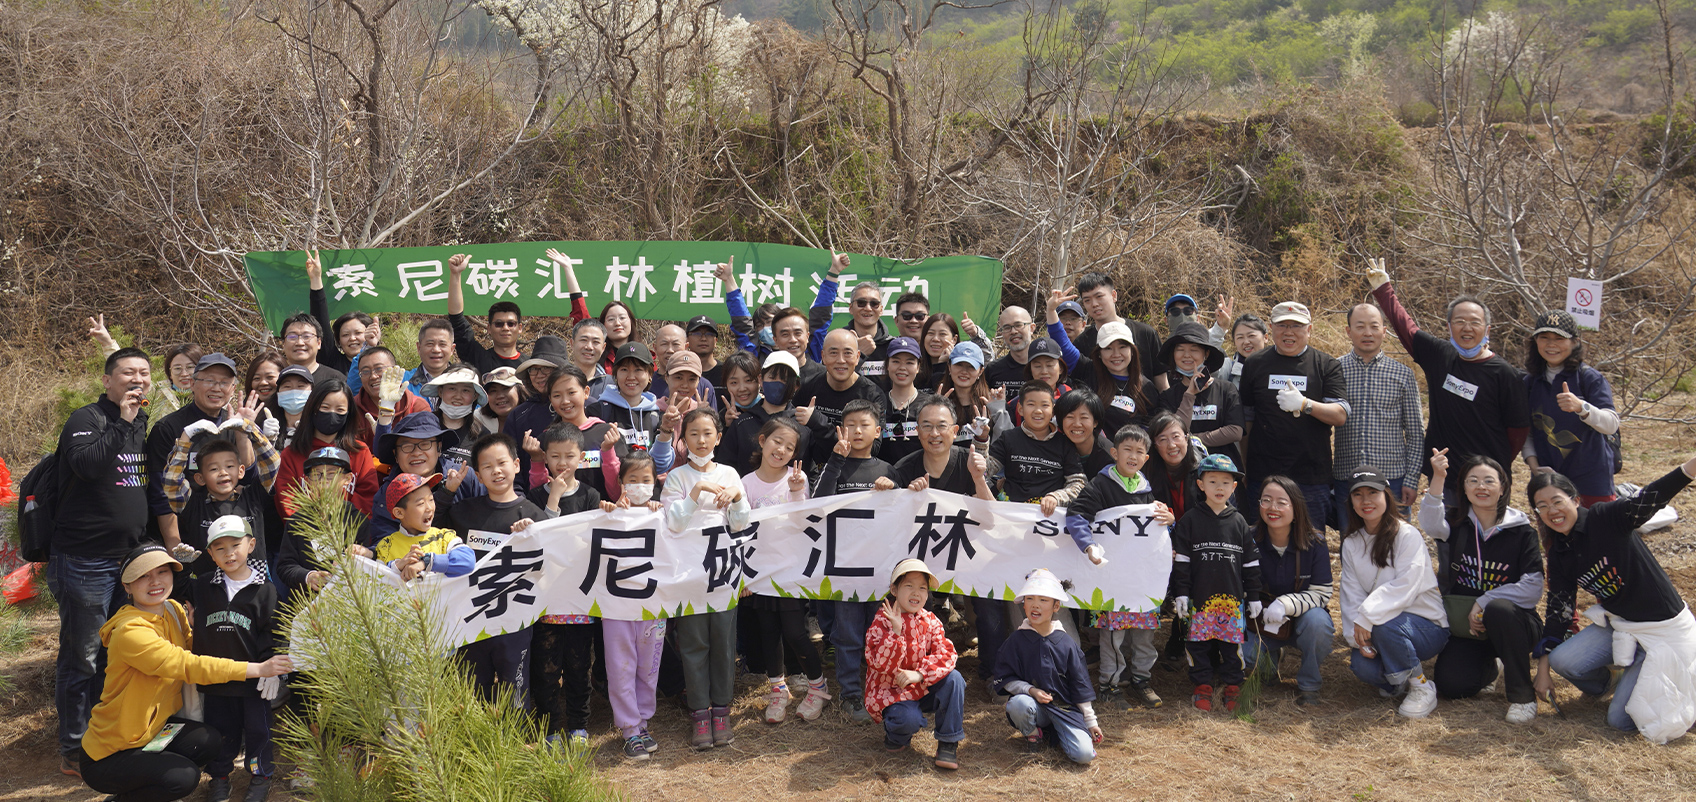 Group photo of people participating in tree-planting activities